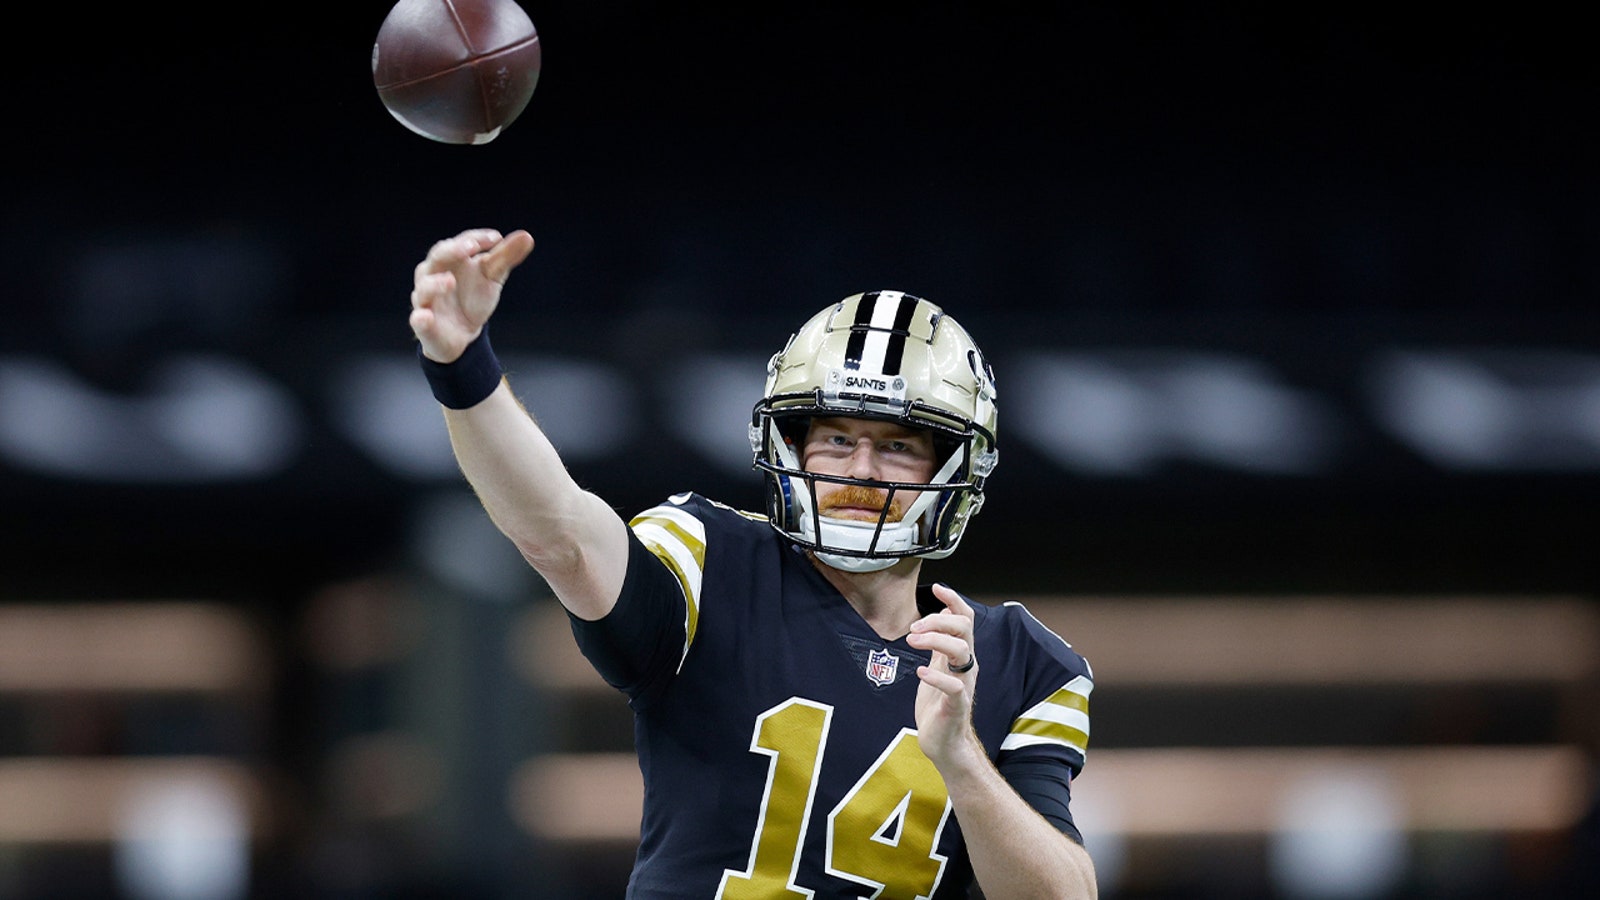 Saints' Andy Dalton SHOULD SHOW in victory over Rams